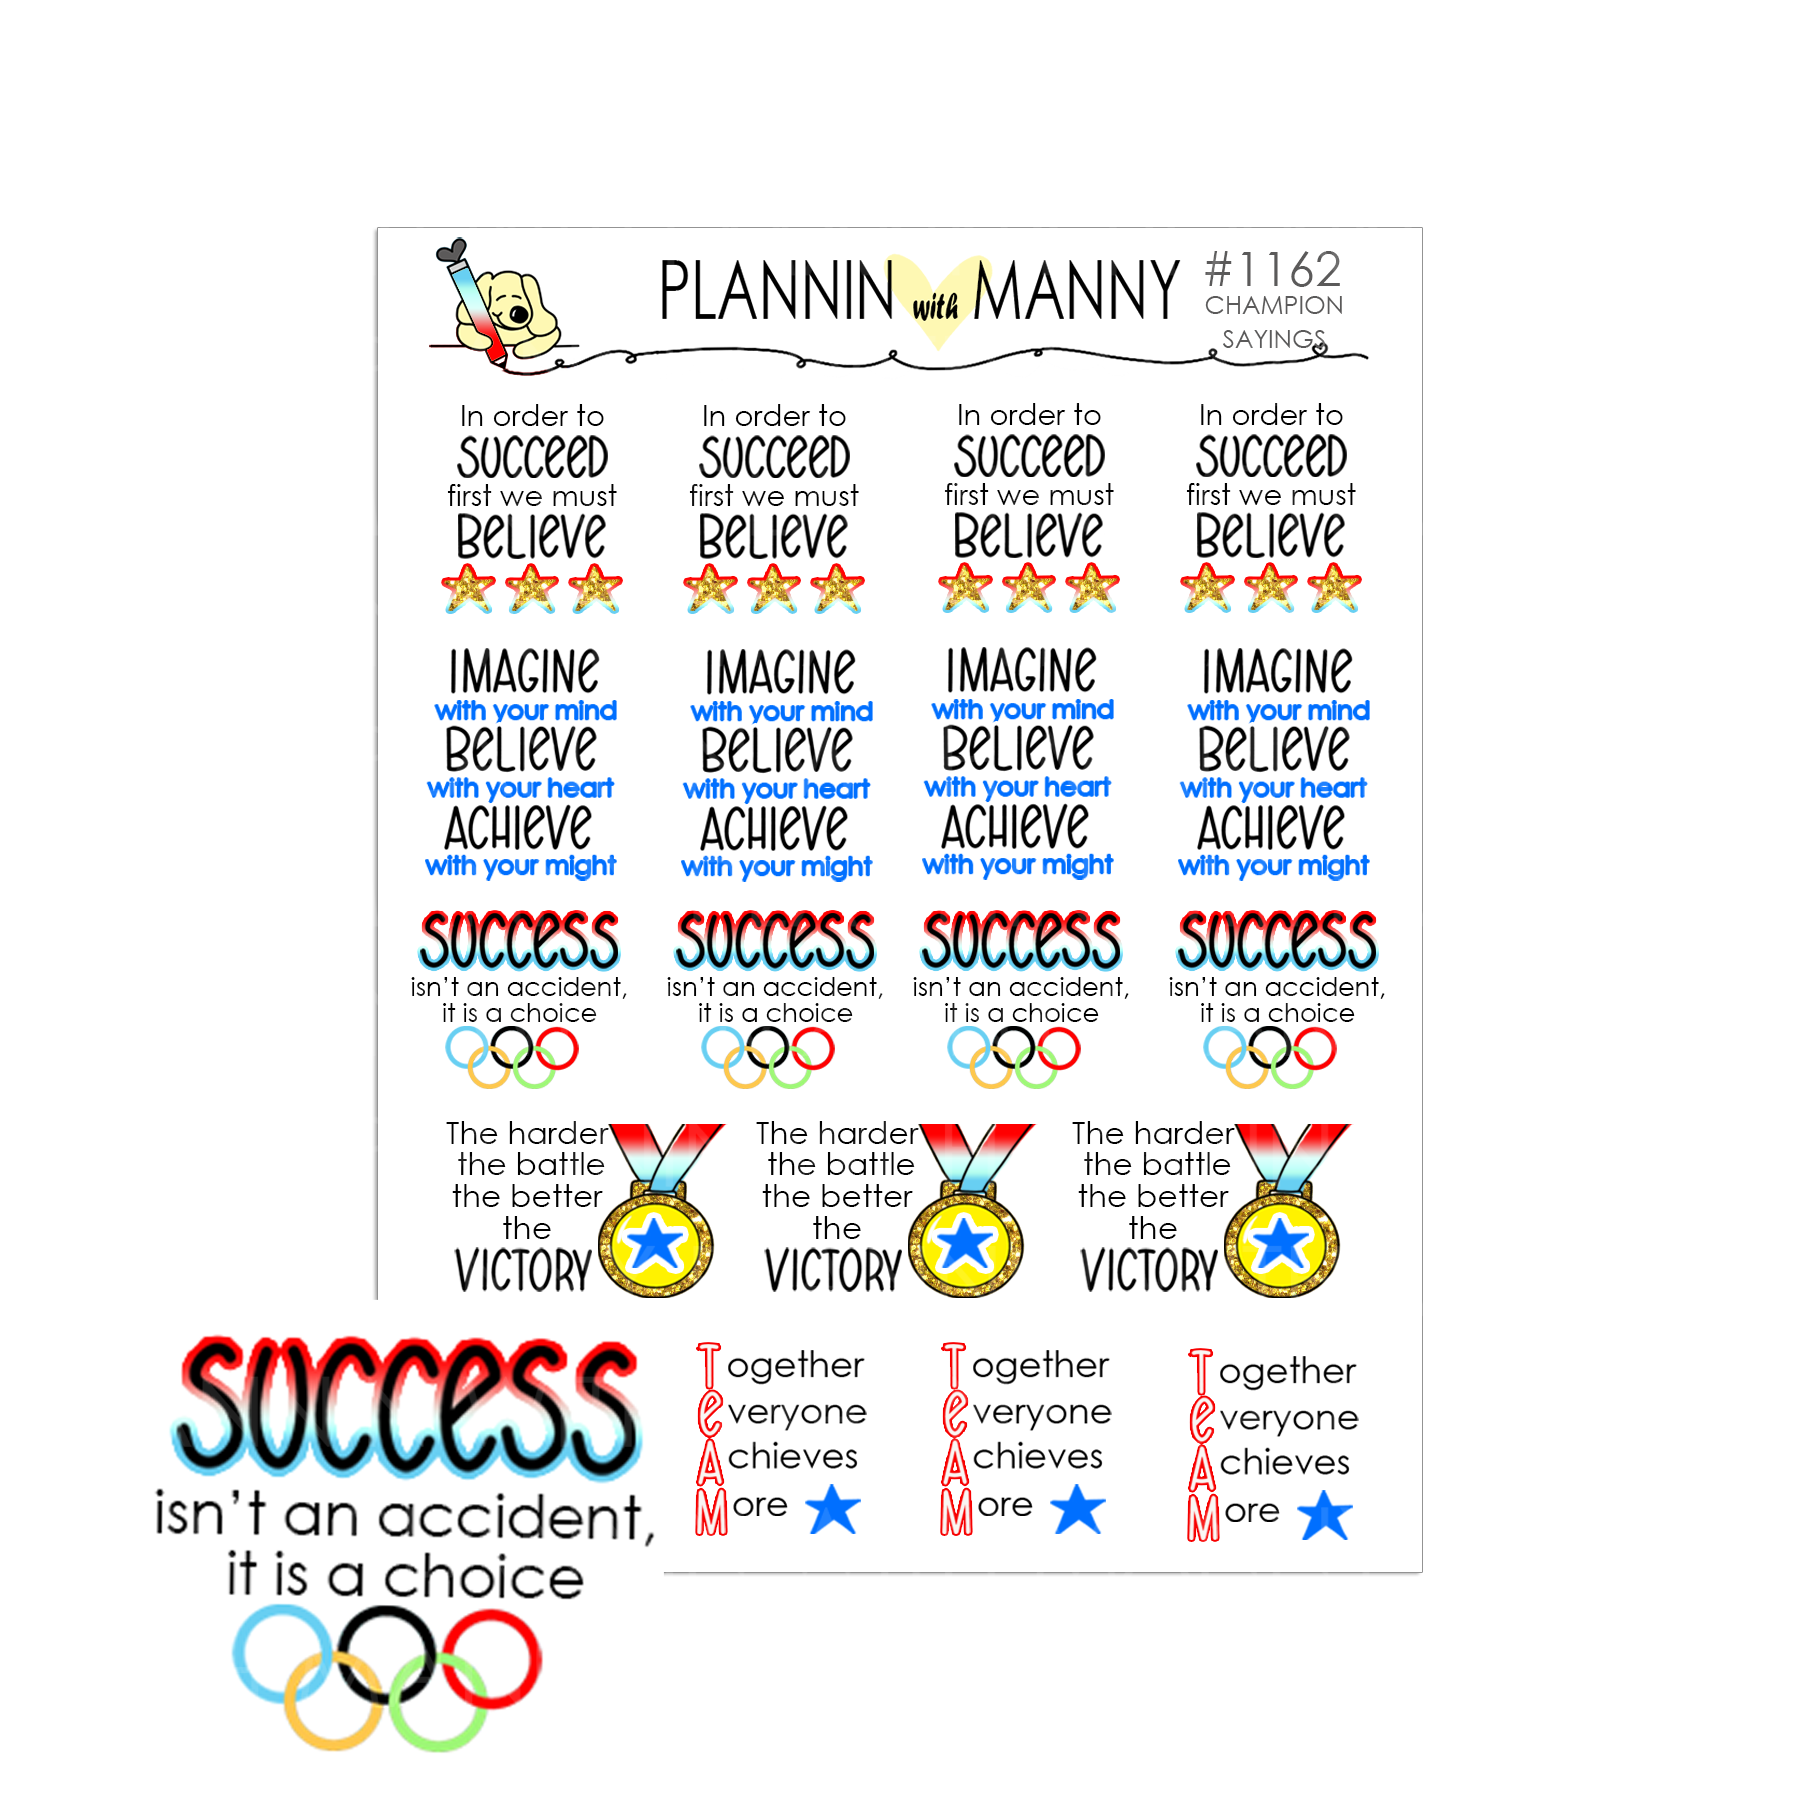 1162 CHAMPION SAYINGS Planner Stickers - Champions Collection